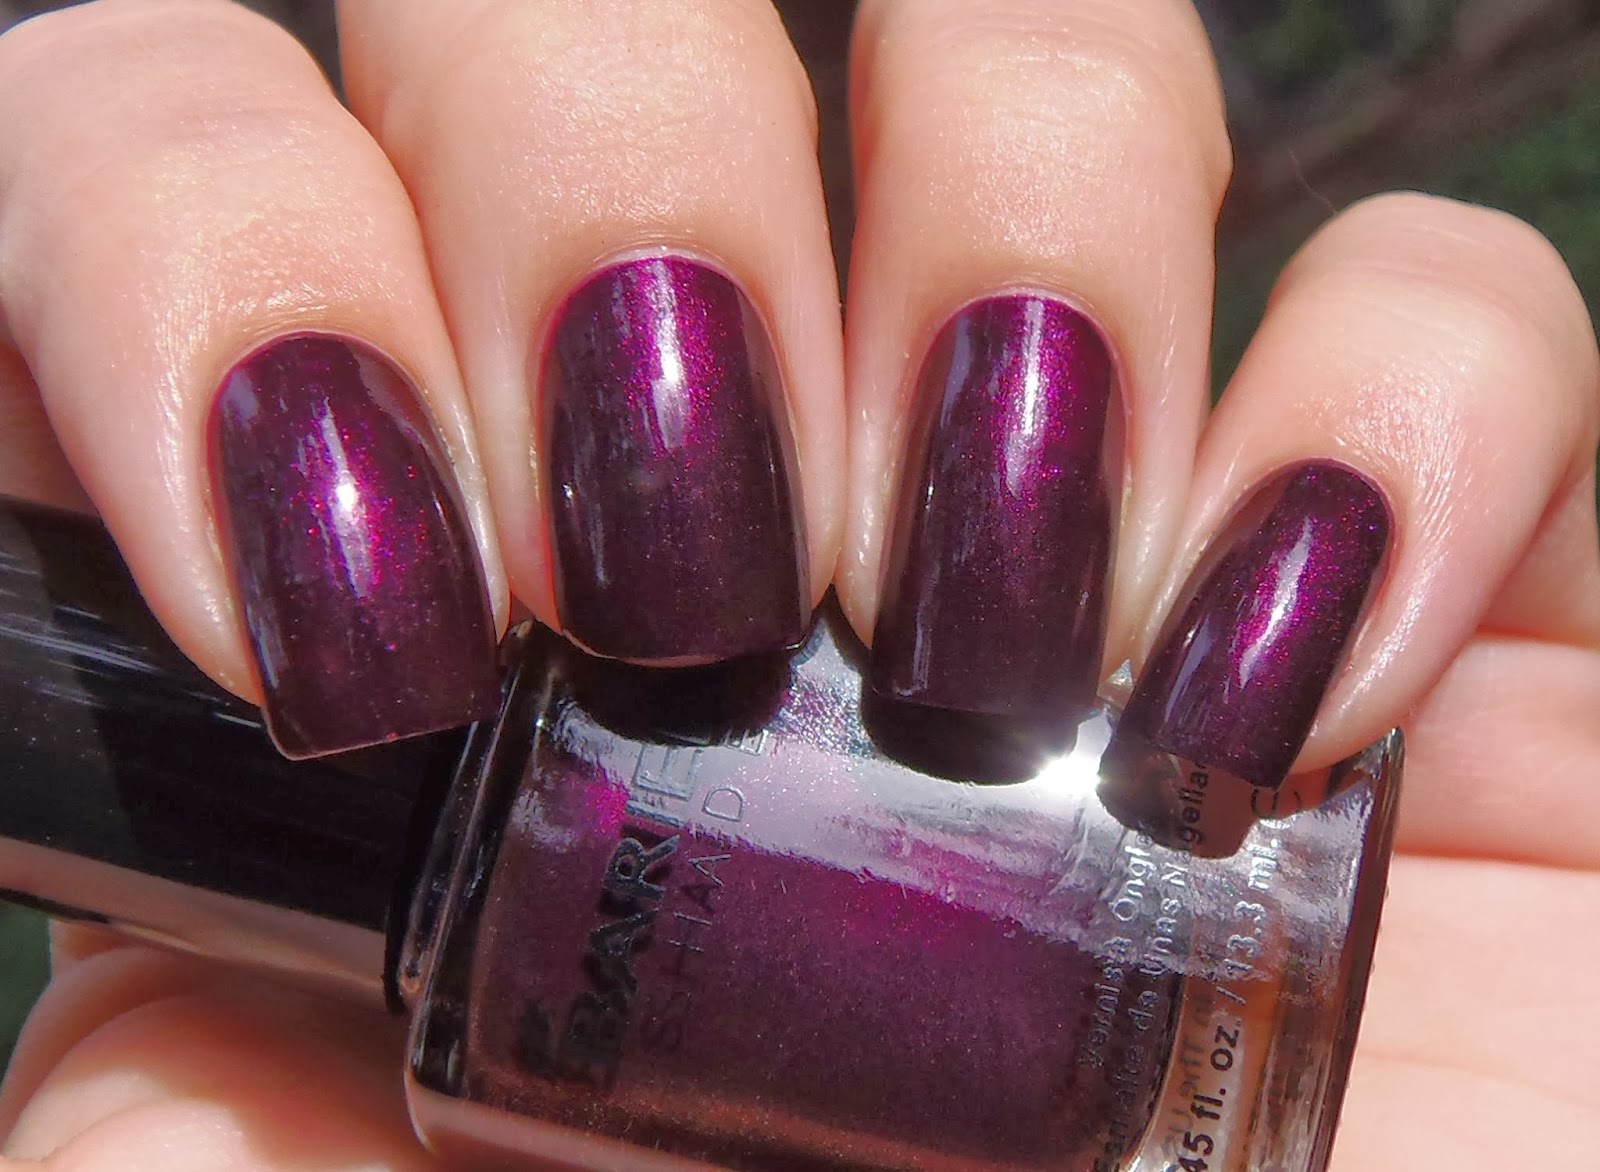 Sparkly Vernis: Barielle Hidden Hideaway is a stunning deep shimmery purple